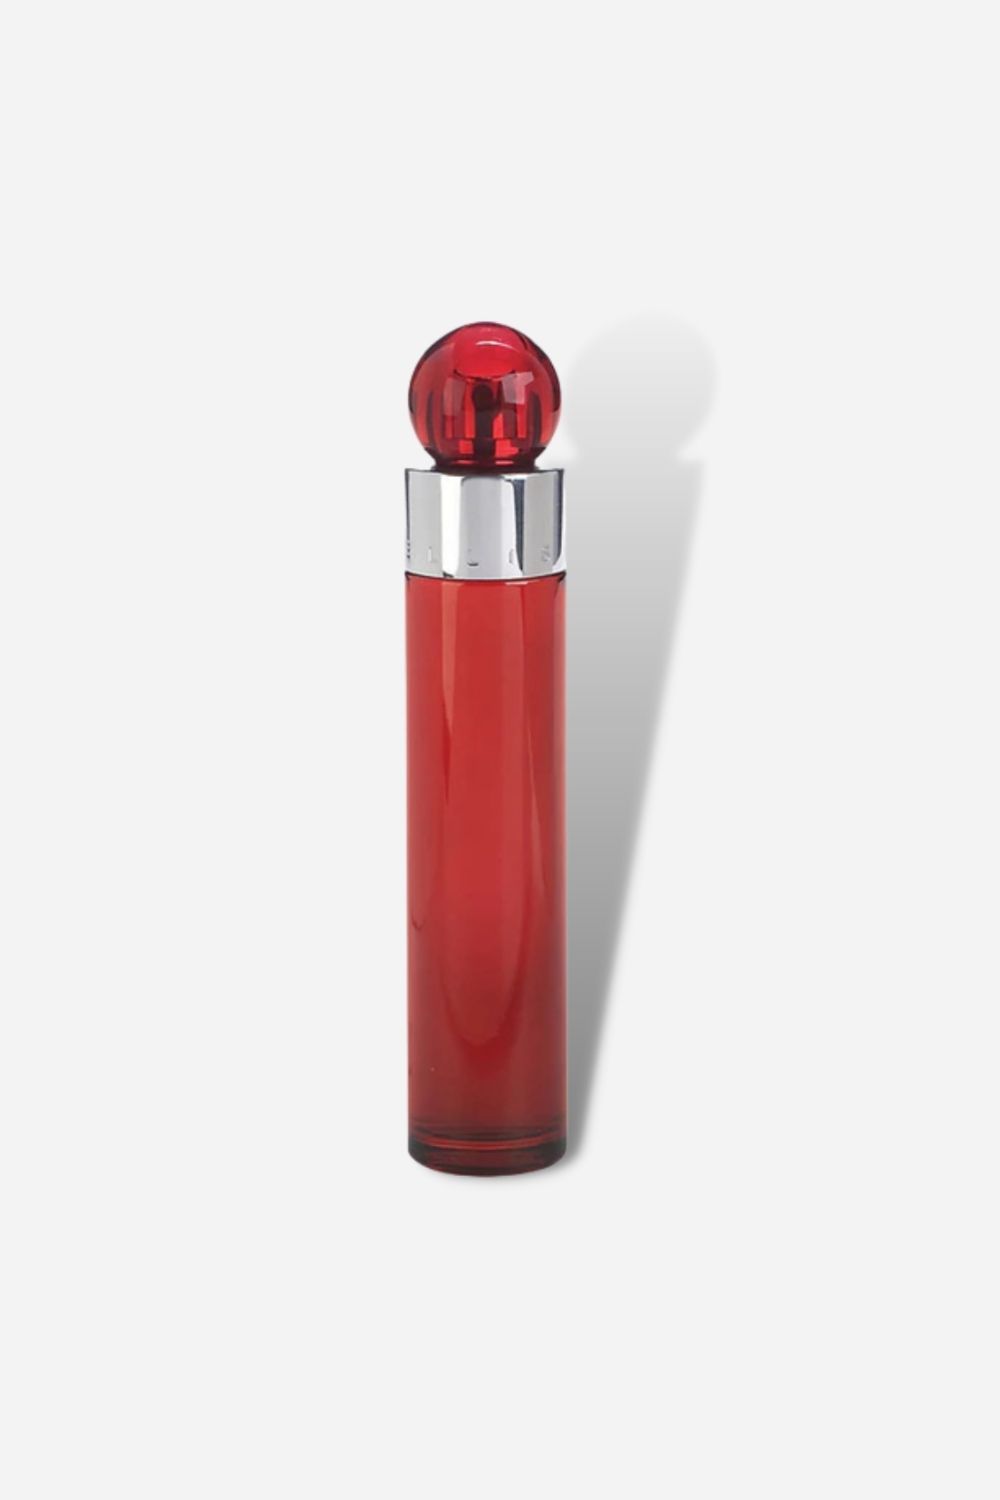 Perry Ellis 360 Red for Men - Besuited Aroma